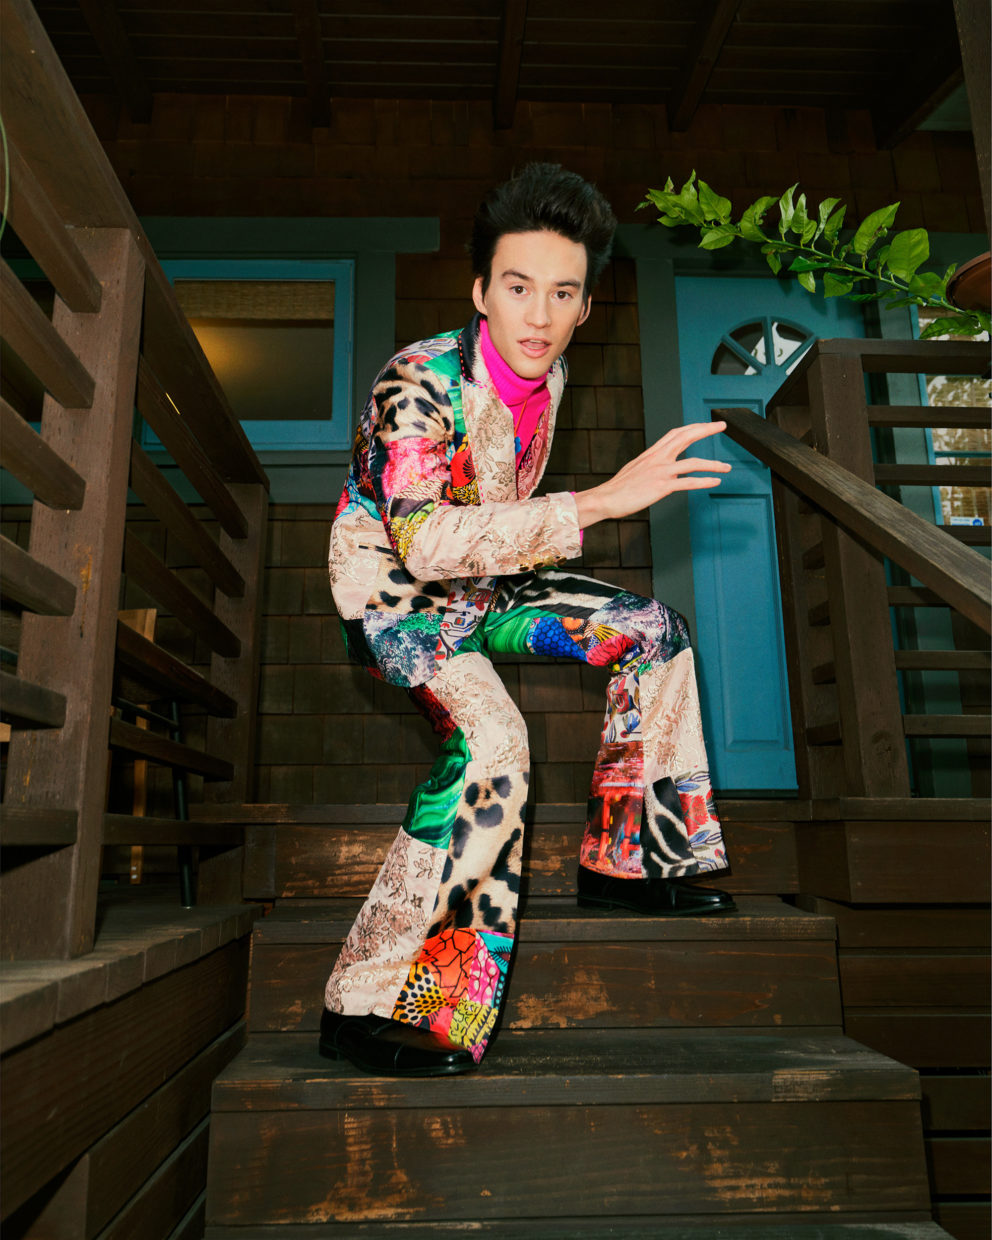 240204 0010 Grammy Awards Jacob Collier 083 Web S Rgb By Christian Hogstedt